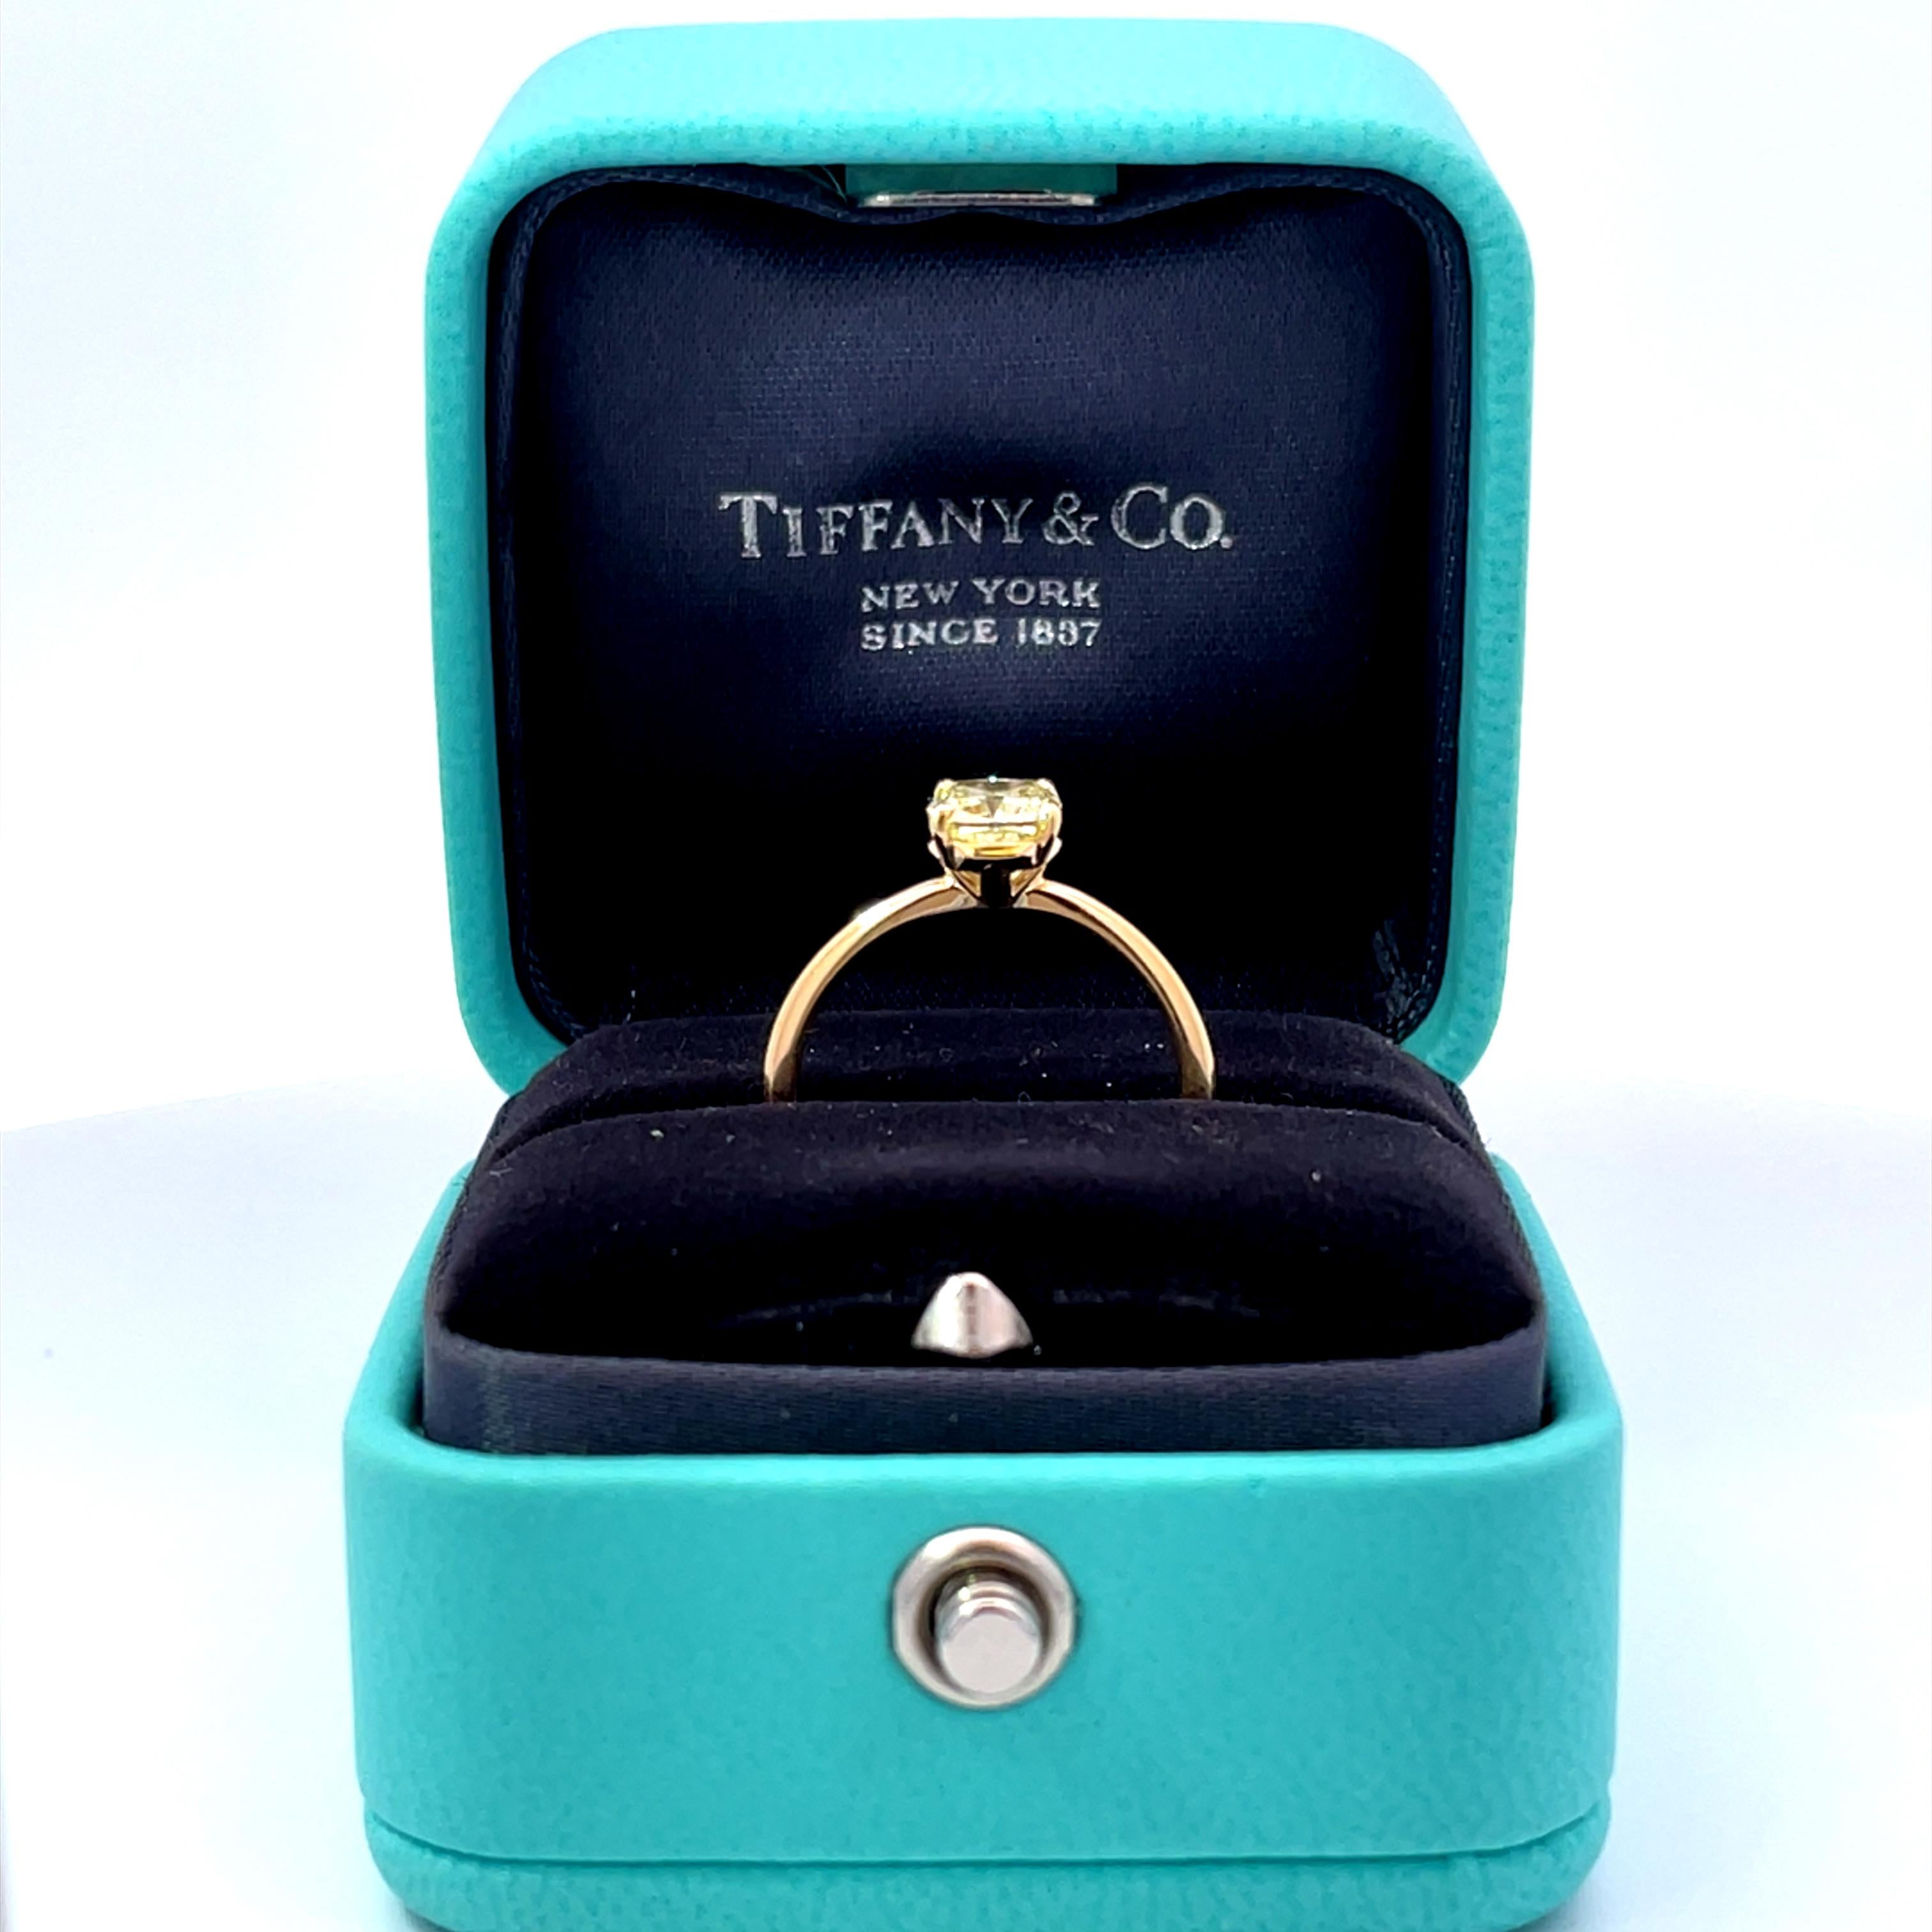 Tiffany & Co. 0.94ct Fancy Yellow Diamond with 18k Yellow Gold Engagement Ring 6